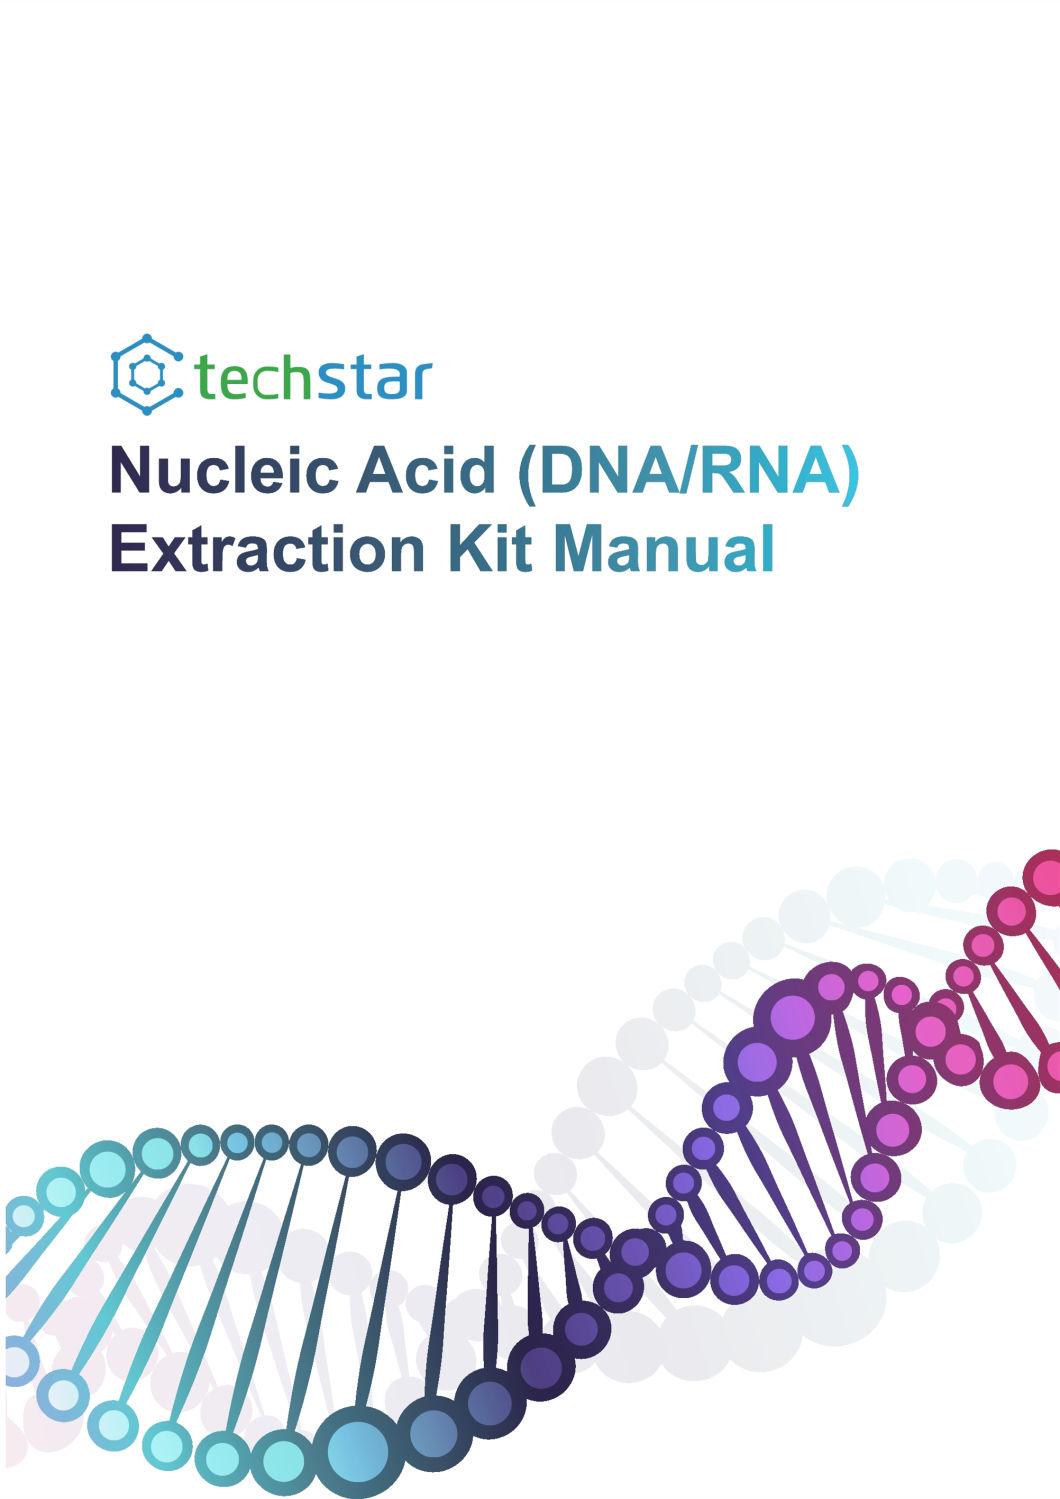 Techstar Nucleic Acid Extraction/Purification Reagent with Virus Sampling Swab Kit